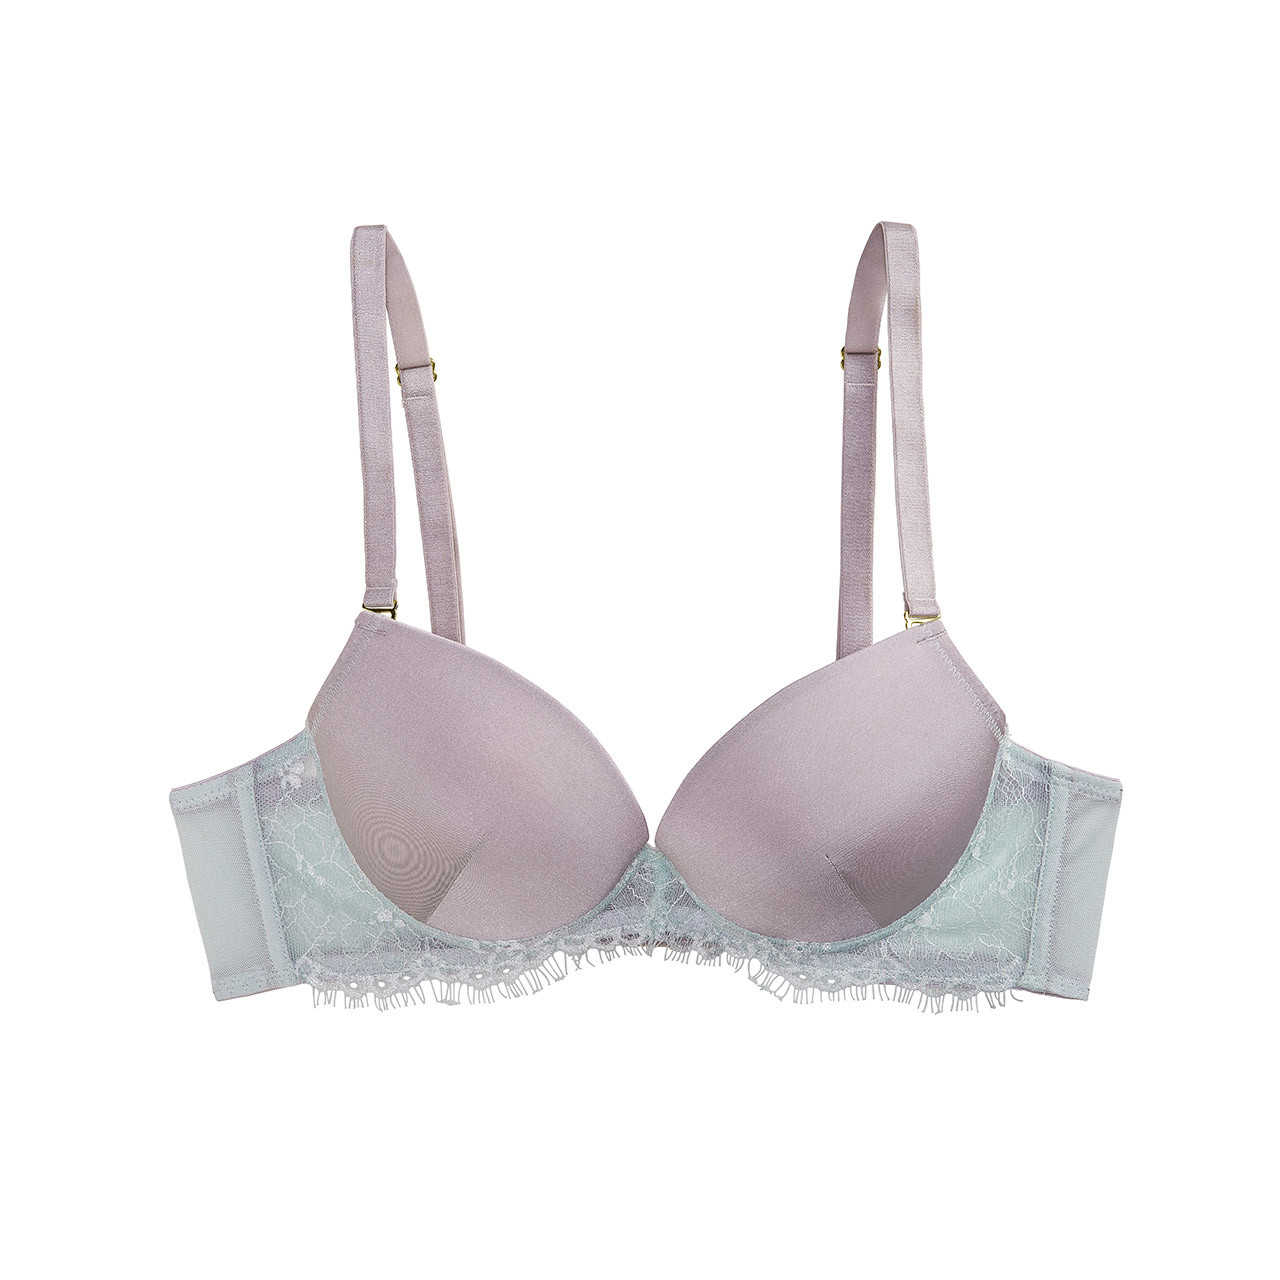 The Little Bra Company Catherine Lace Push-Up Bra in Mint/Wisteria